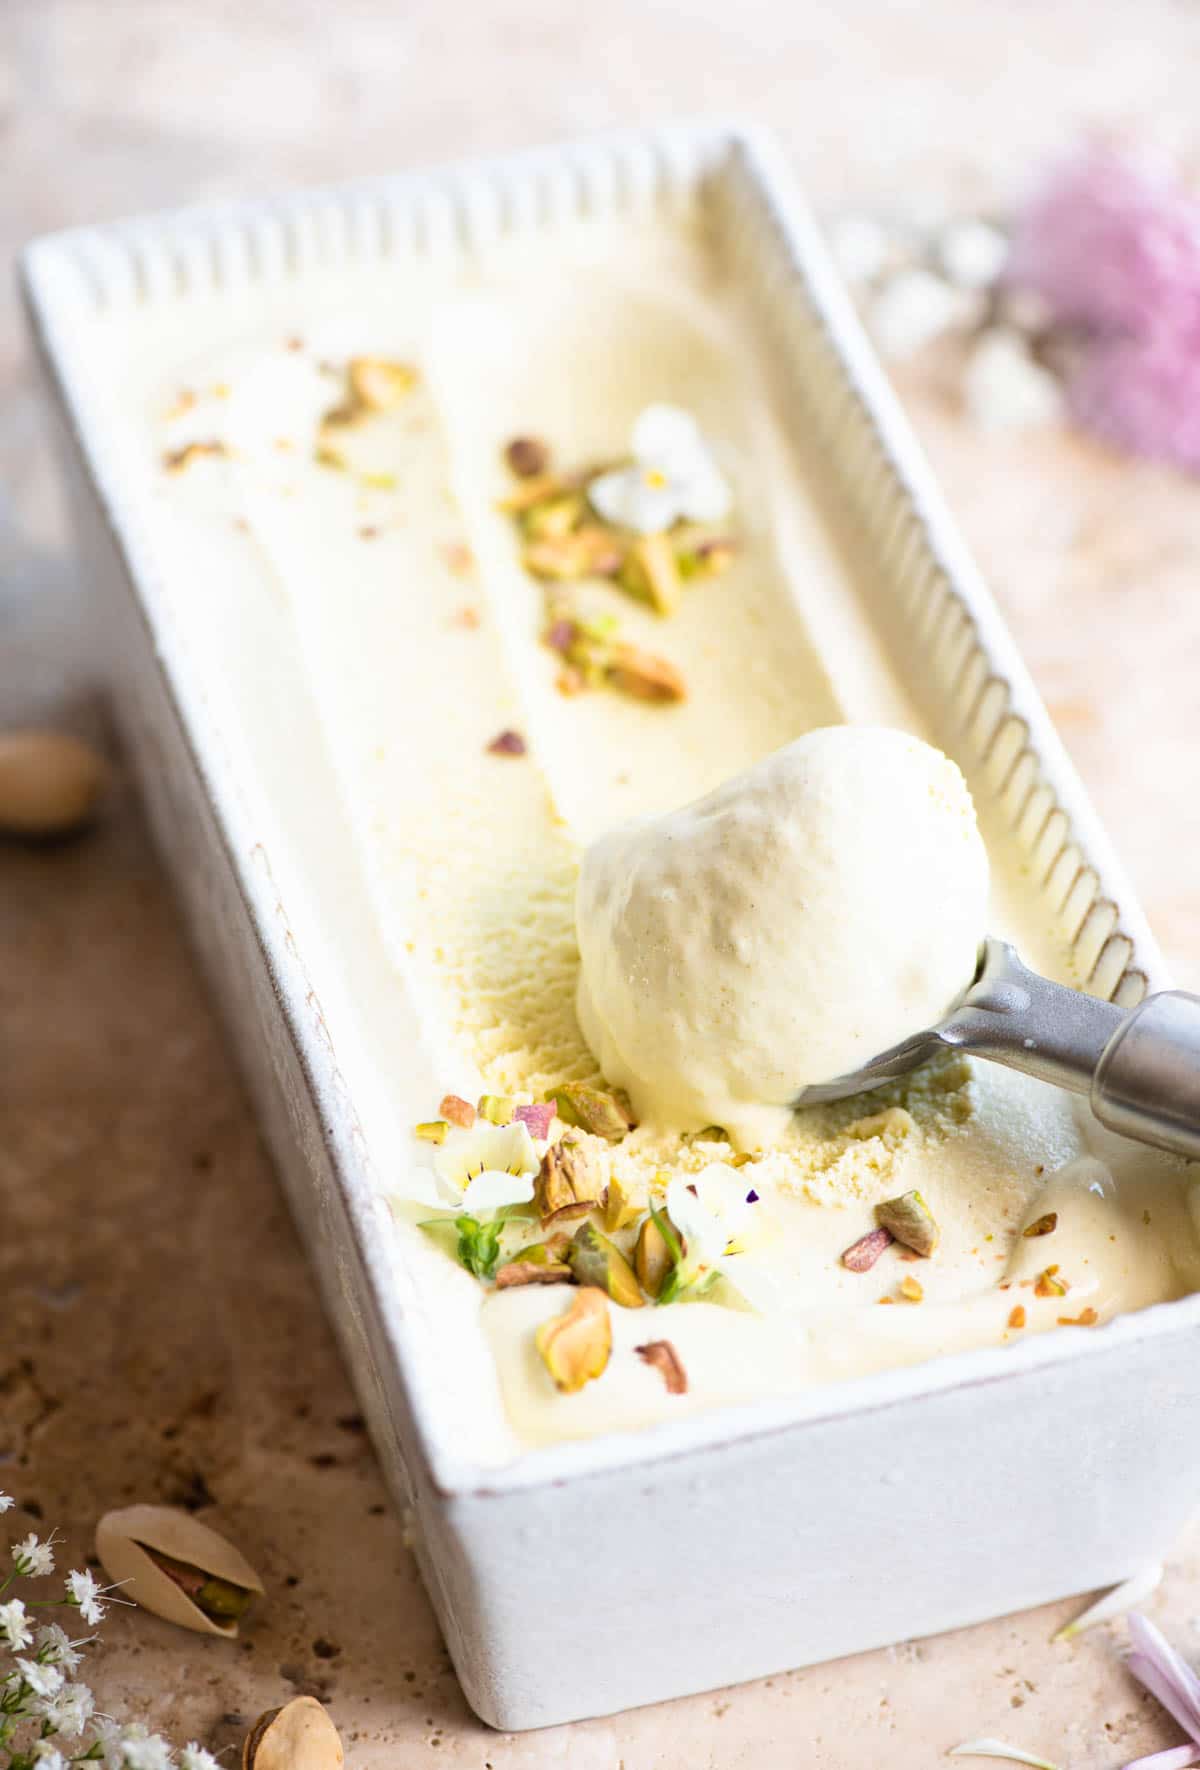 Pistachio ice cream in a loaf dish with a sccop of ice cream at one end